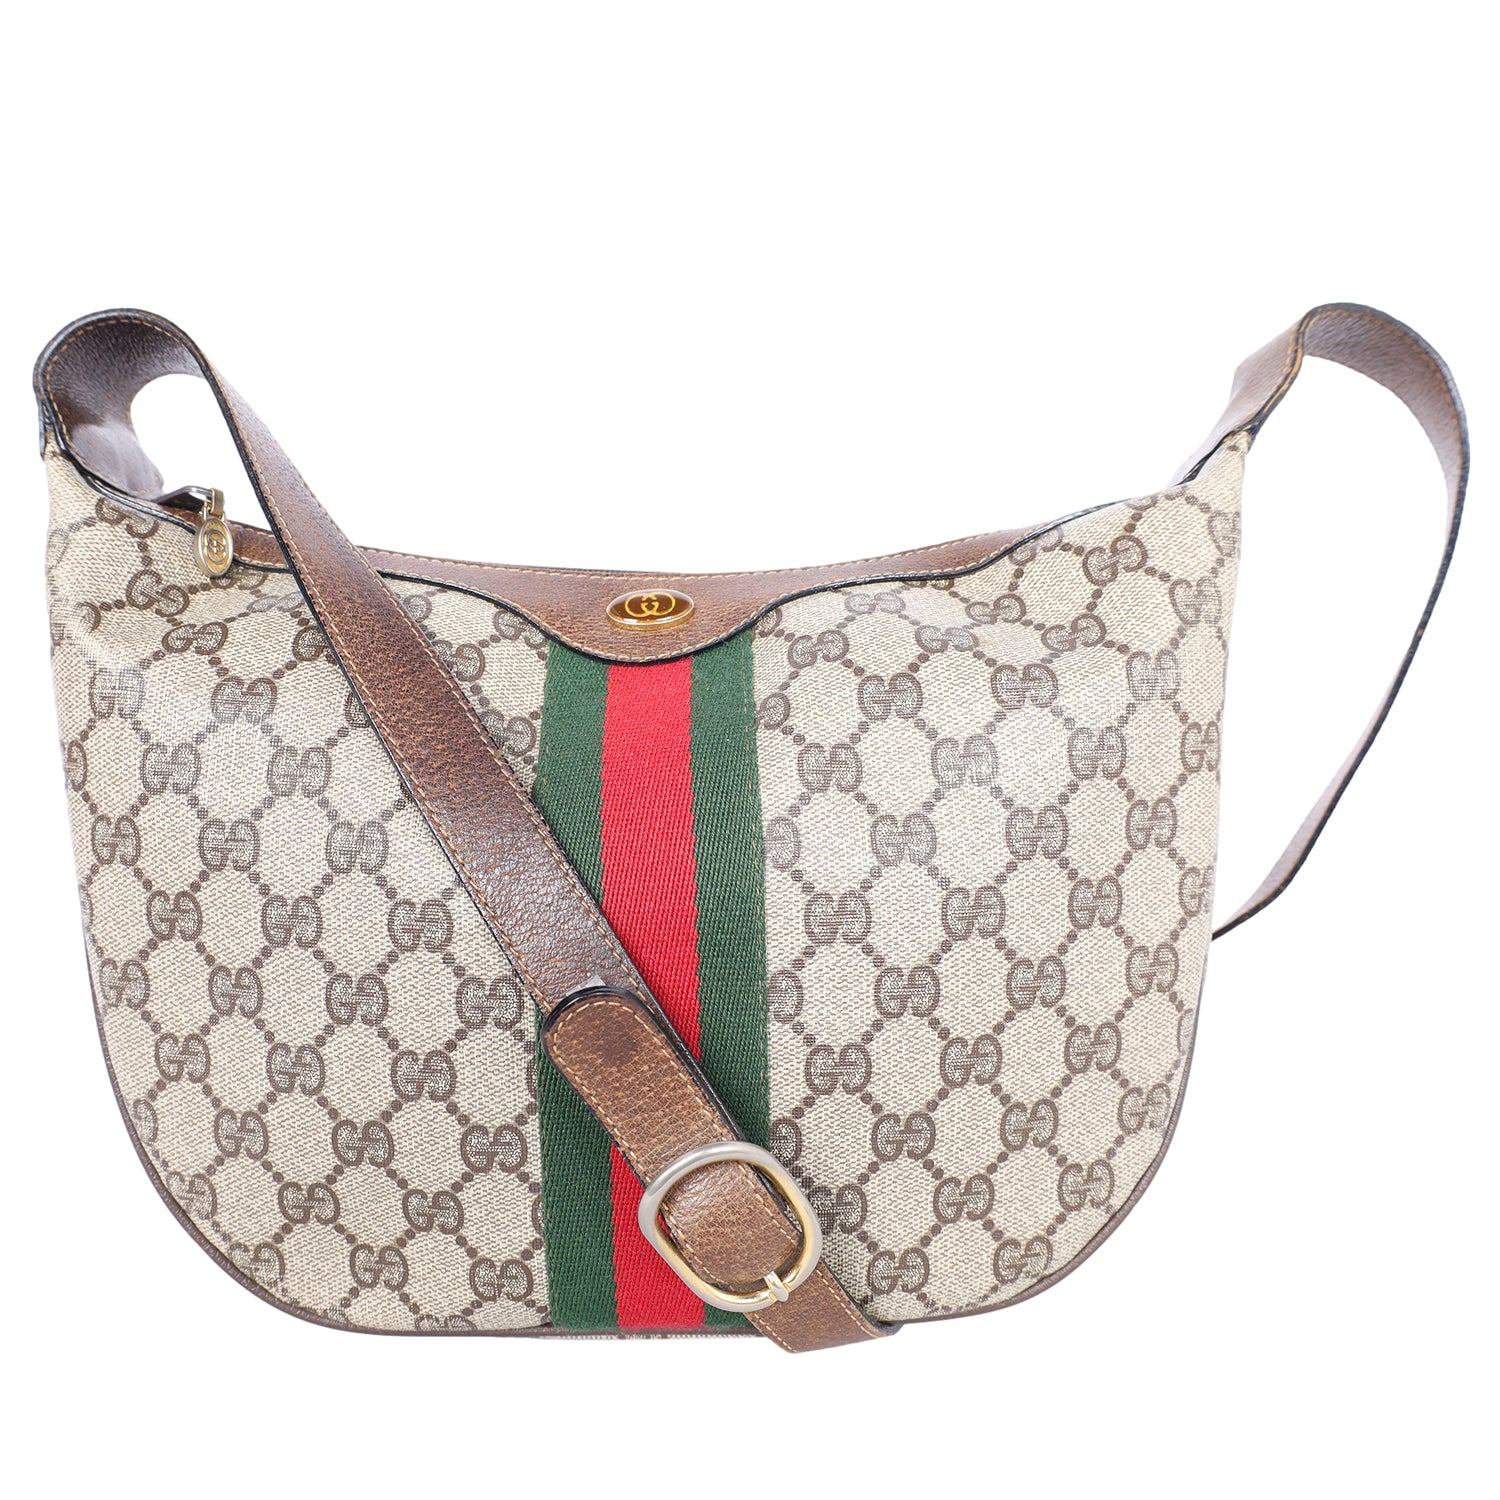 Gucci GG Supreme Ophidia Small Tote - Touched Vintage